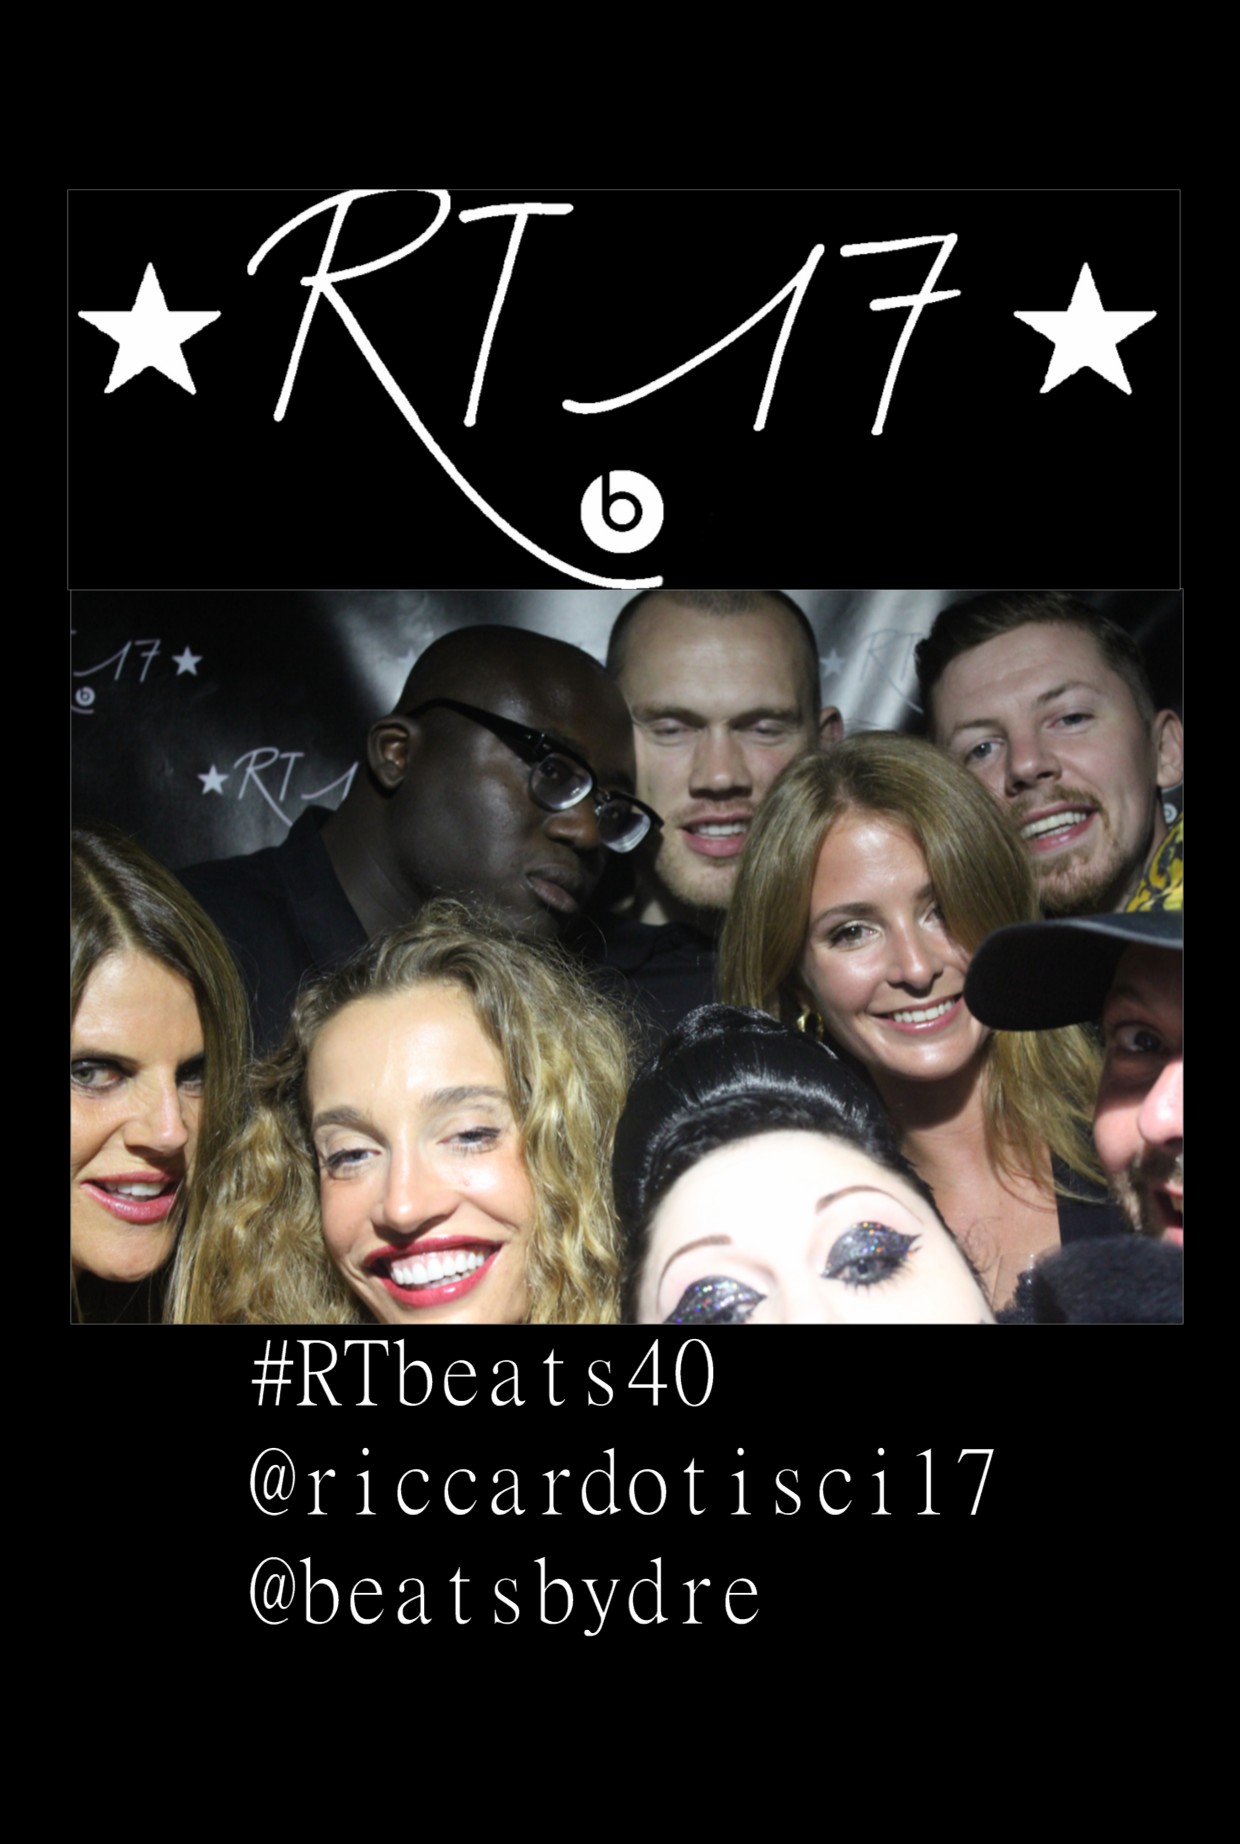 Professor Green, Millie Manckintosh, Edward Enniful, Beth Ditto and Anna Del Russo joined Beats by Dre to wish Riccardo Tisci Happy 40th in the Beats by Dre photobooth